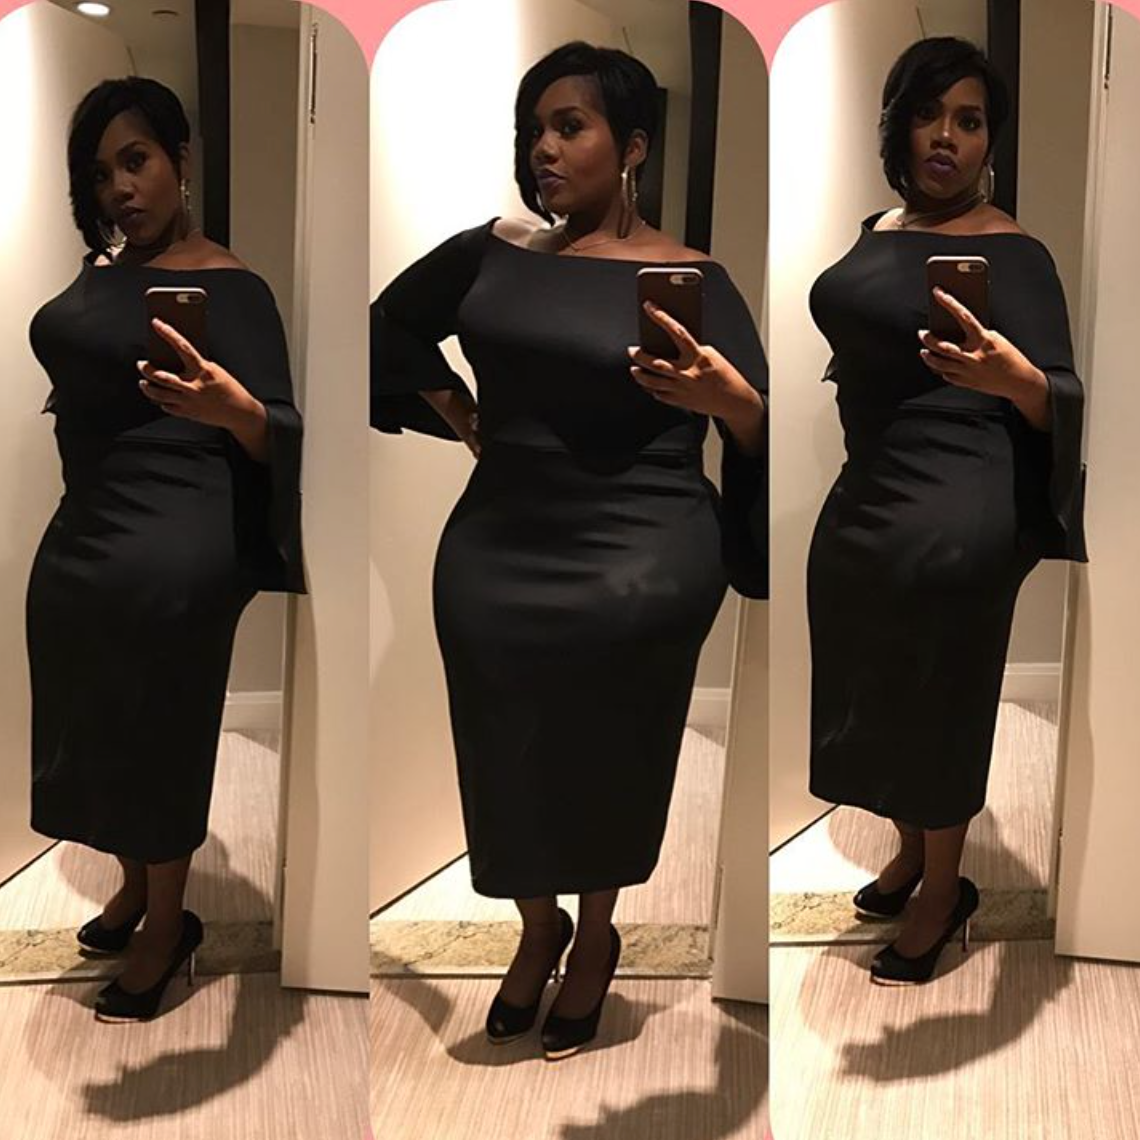 12 Inspiring Photos Of Kelly Price's Amazing New Body and Dramatic Weight Loss
